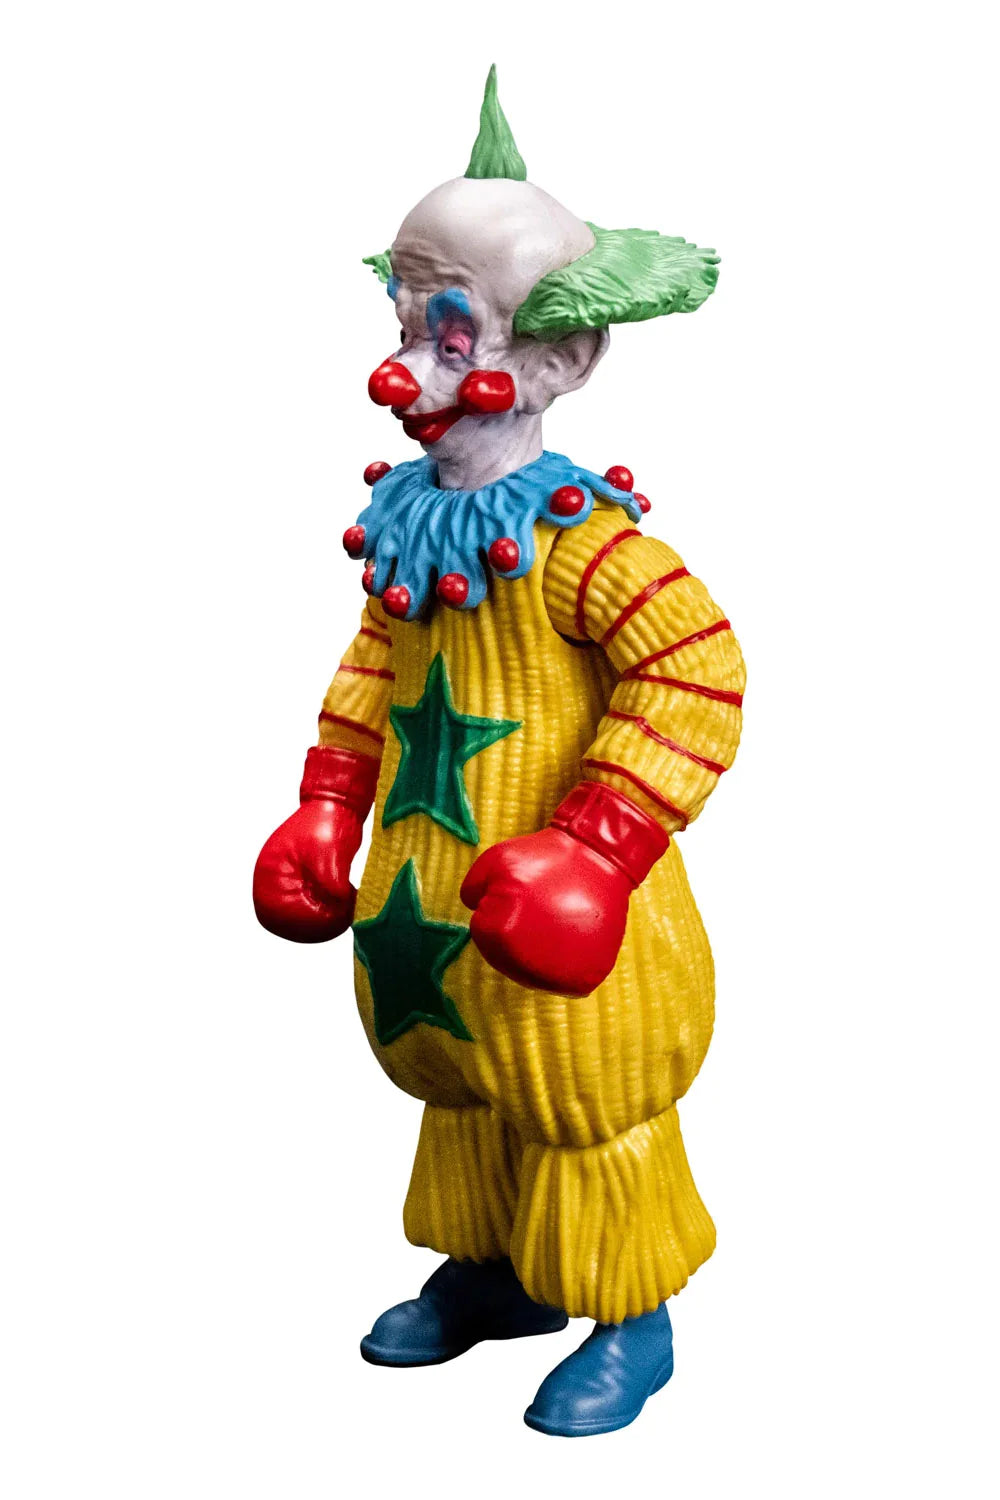 Killer Klowns from Outer Space: Shorty (Scream Greats) - 8" Action Figure: